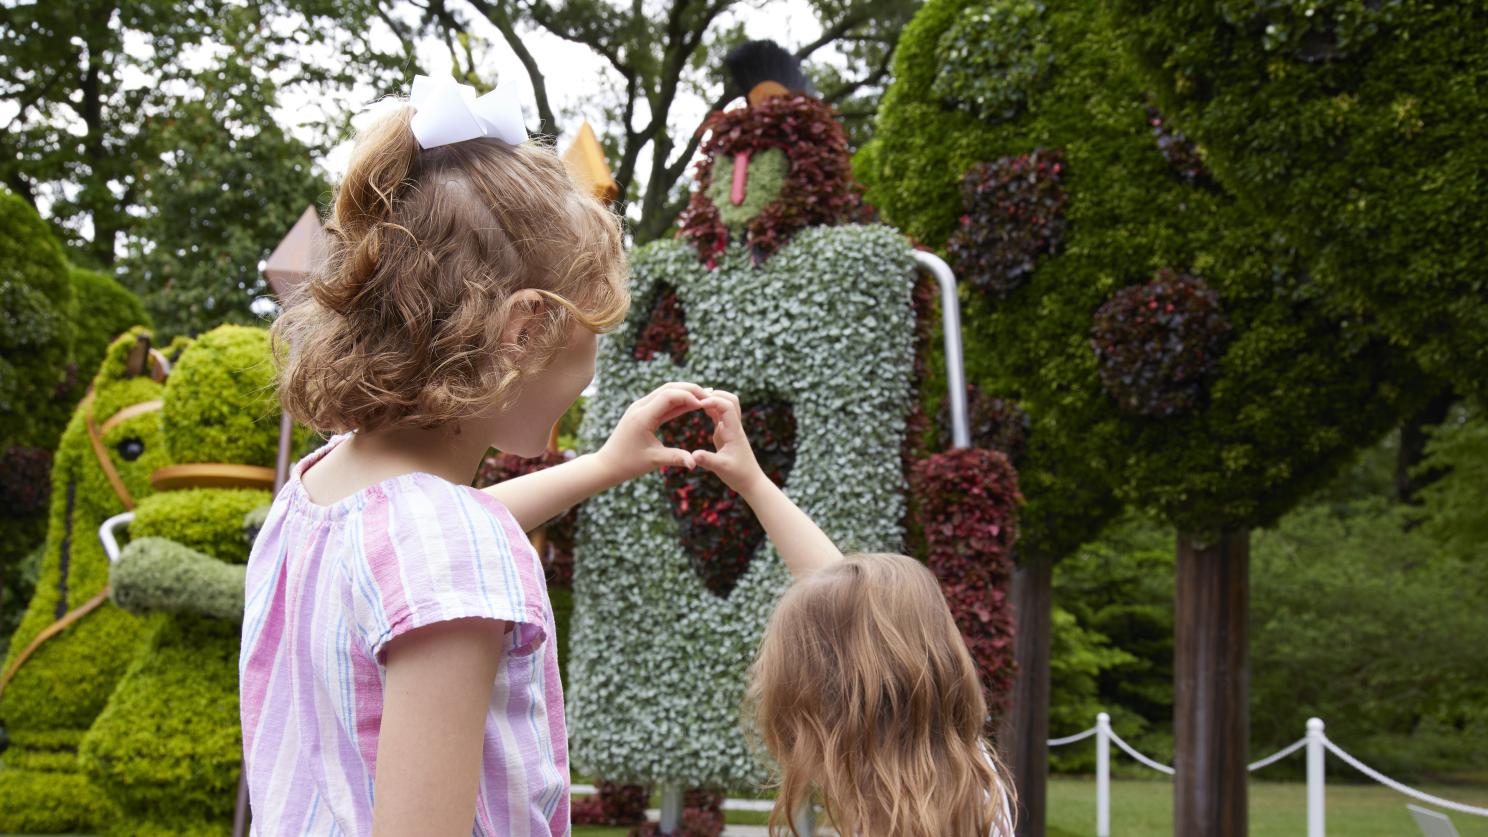 Discover the wonder of Alice's Adventures at the Garden